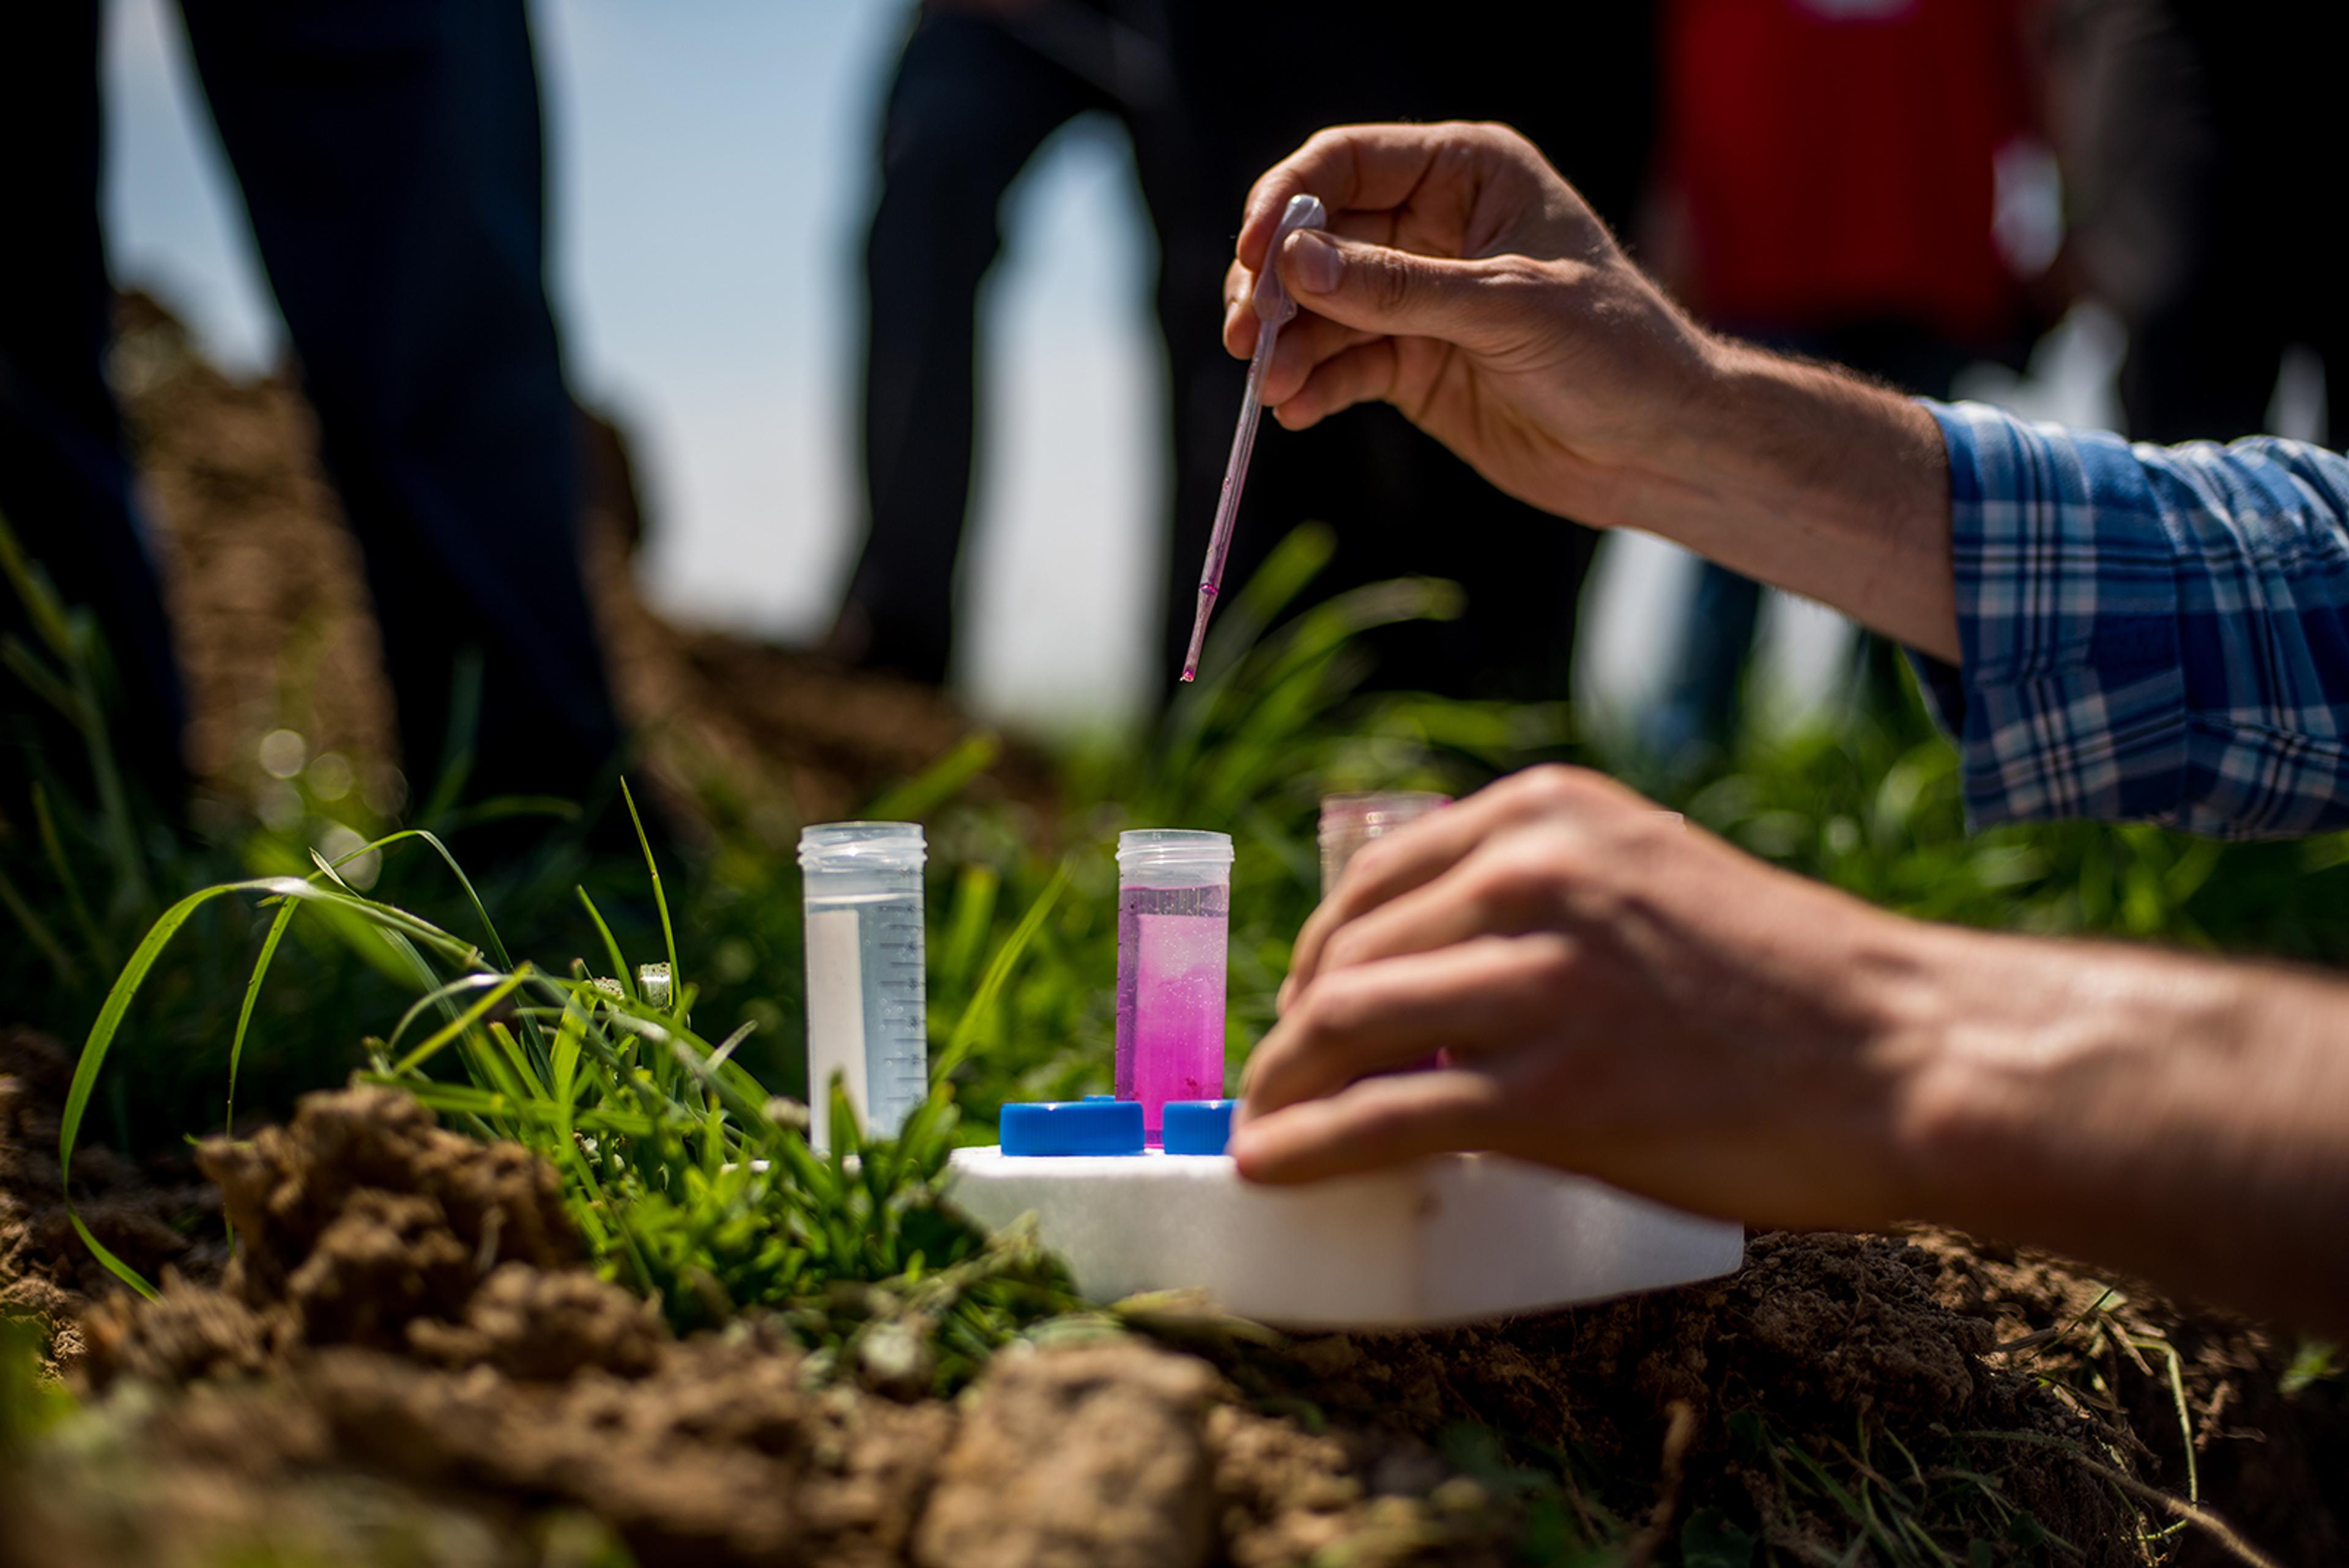 Test tubes turn bright pink during a soil testing demonstration at an educational workshop for Organic Valley farmers in Ohio.